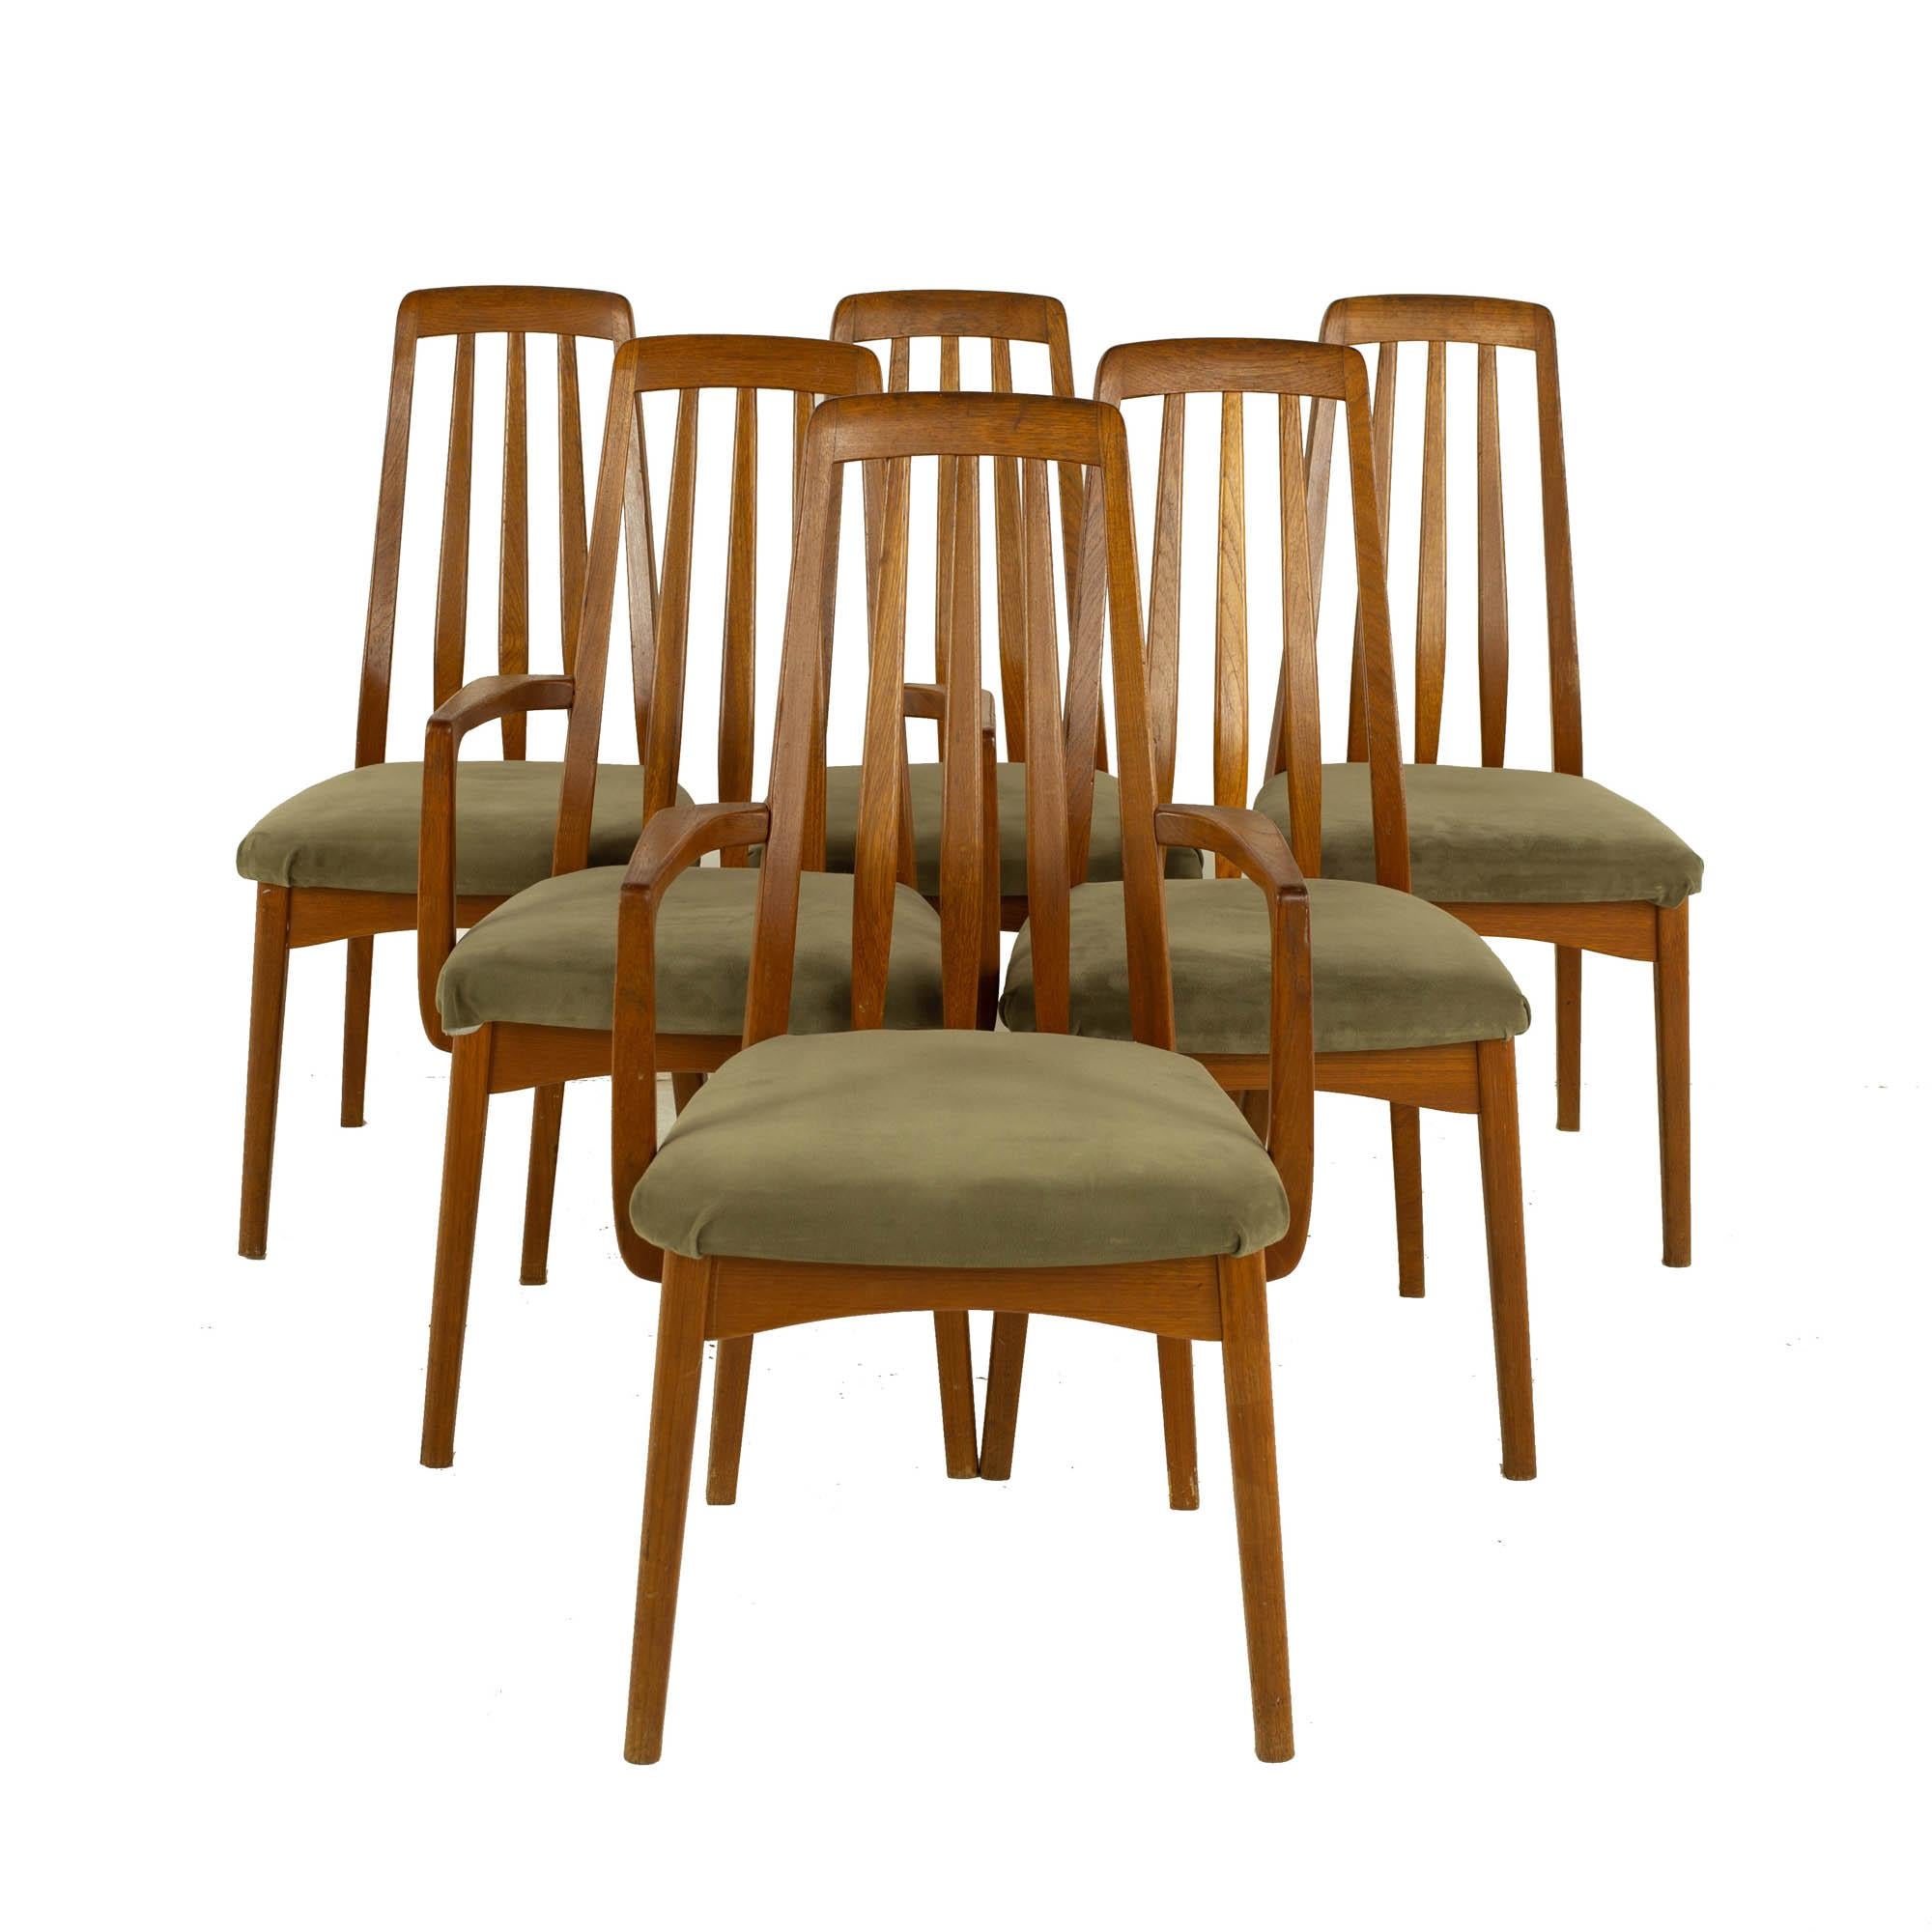 Koefeds Hornslet Eva style mid century teak dining chairs - set of 6

Each chair measures: 19 wide x 21 deep x 37 high, with a seat height of 18 inches and arm height/chair clearance of 25.5 inches

?All pieces of furniture can be had in what we